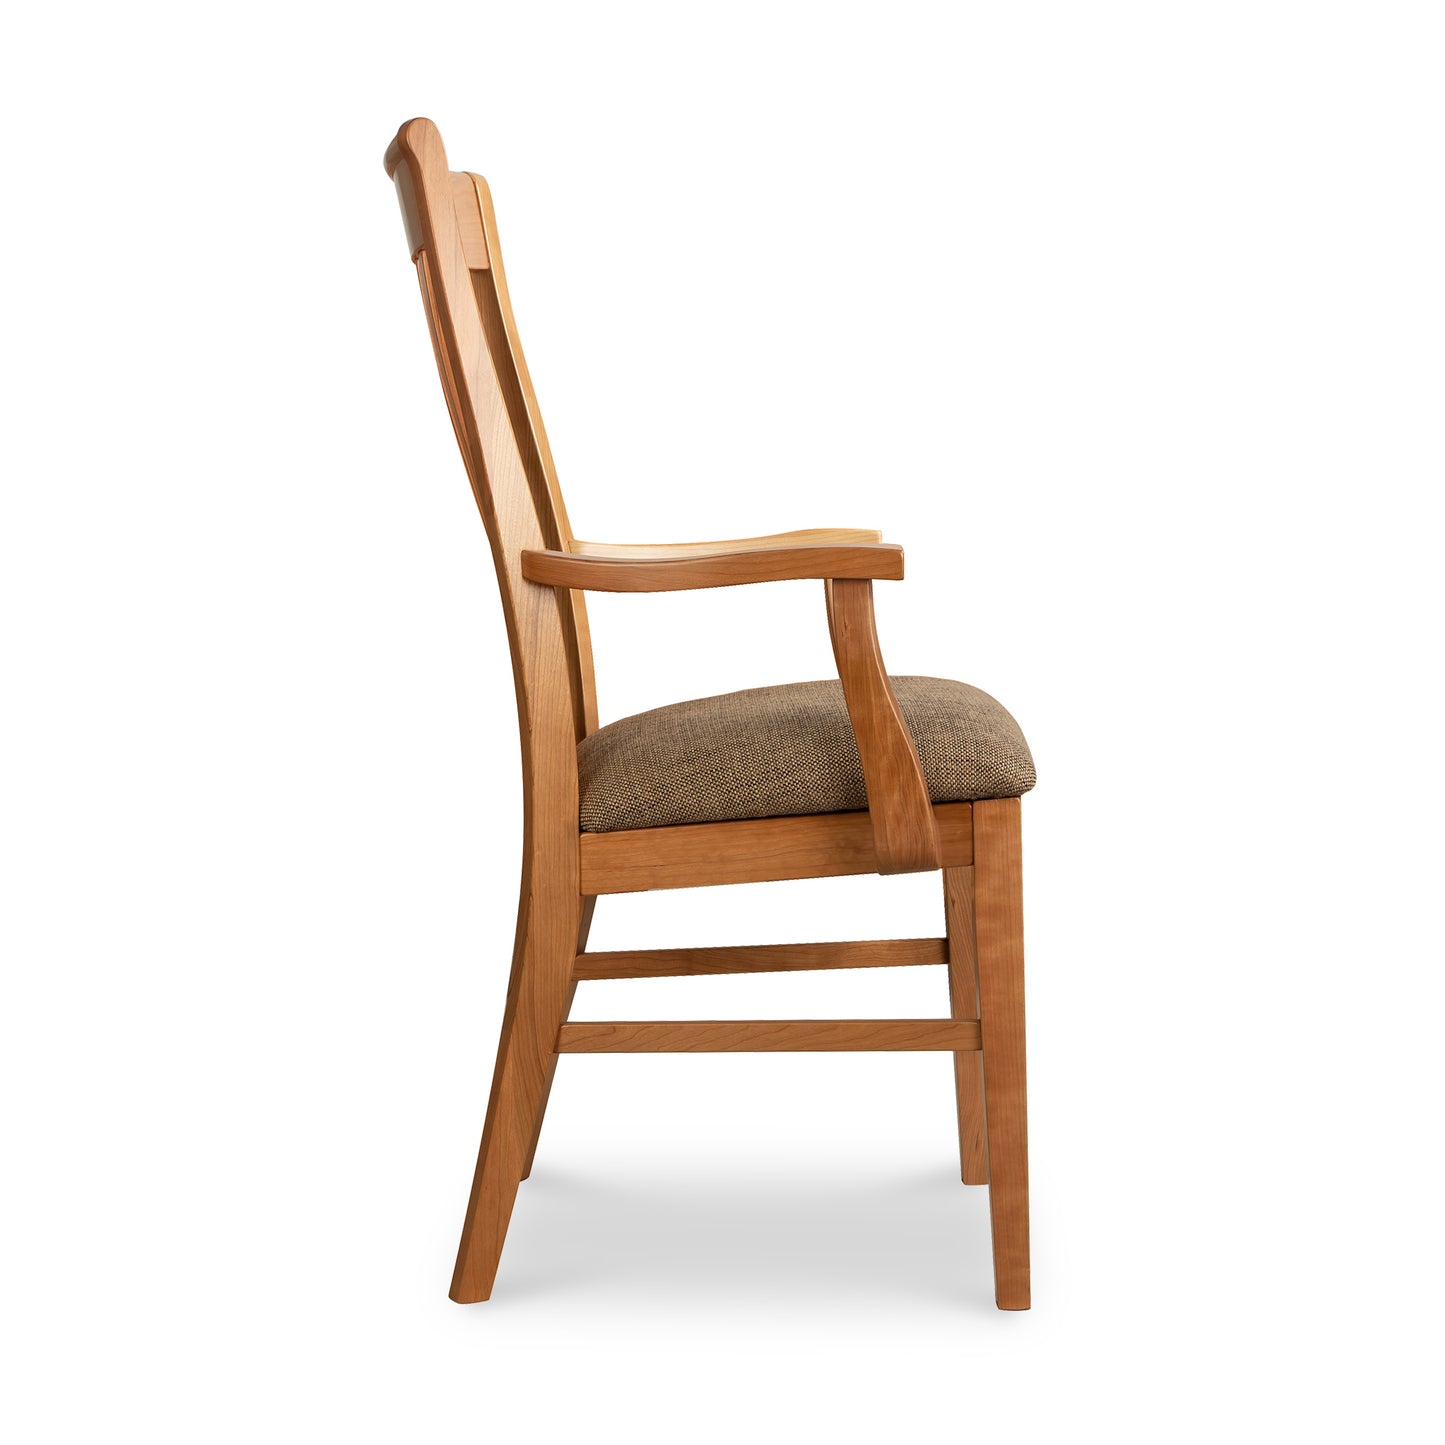 A wooden dining chair with a brown upholstered seat.